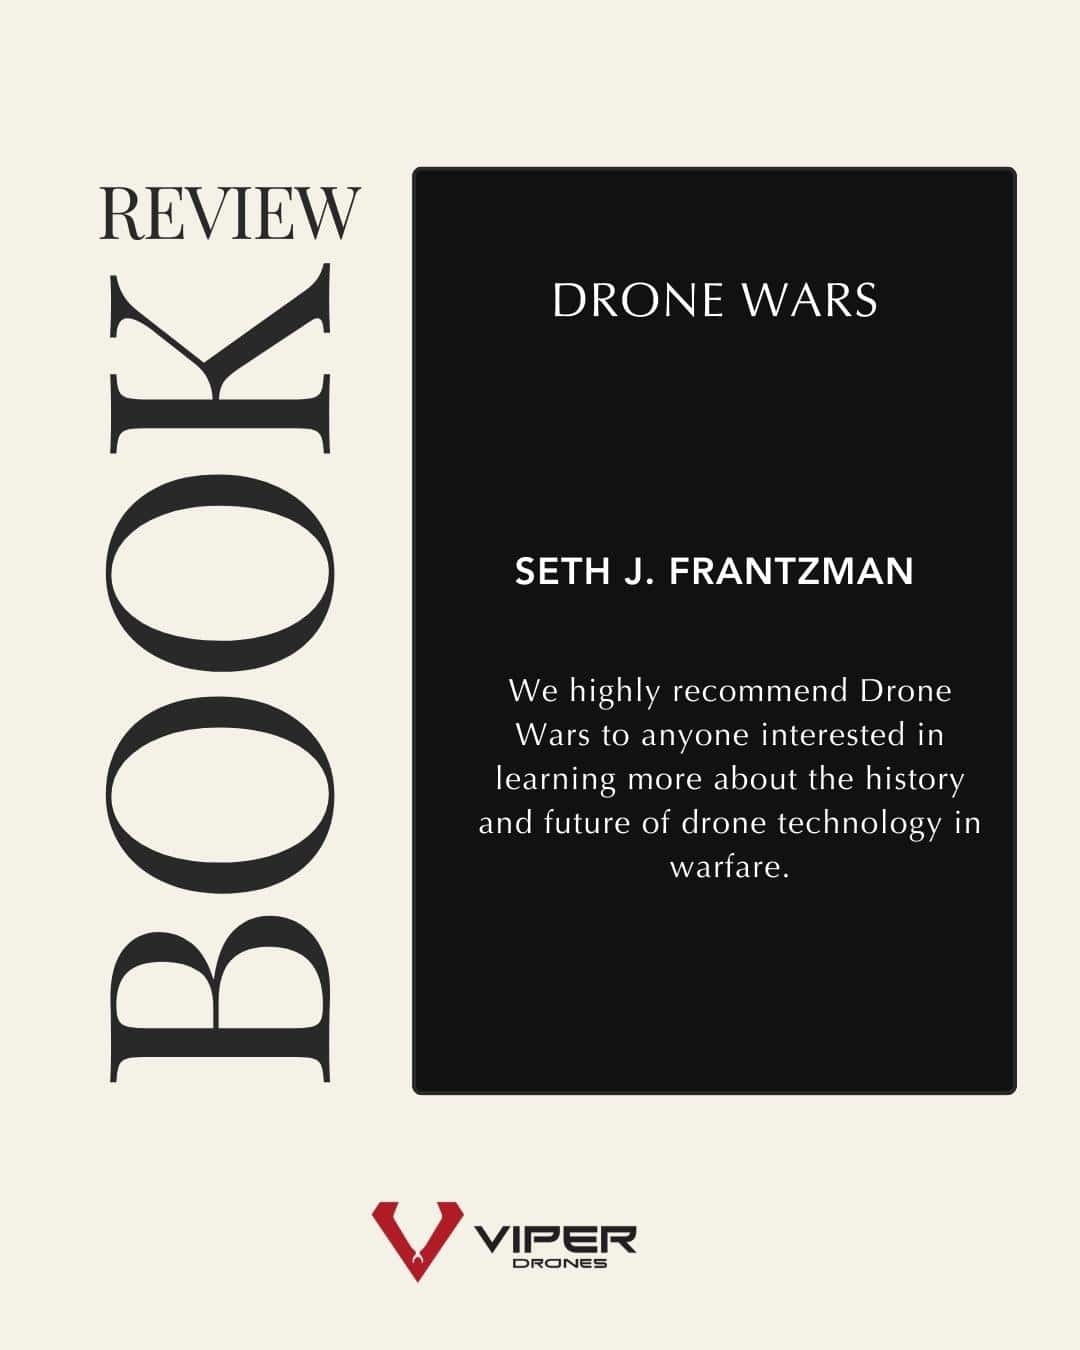 drone wars book review text